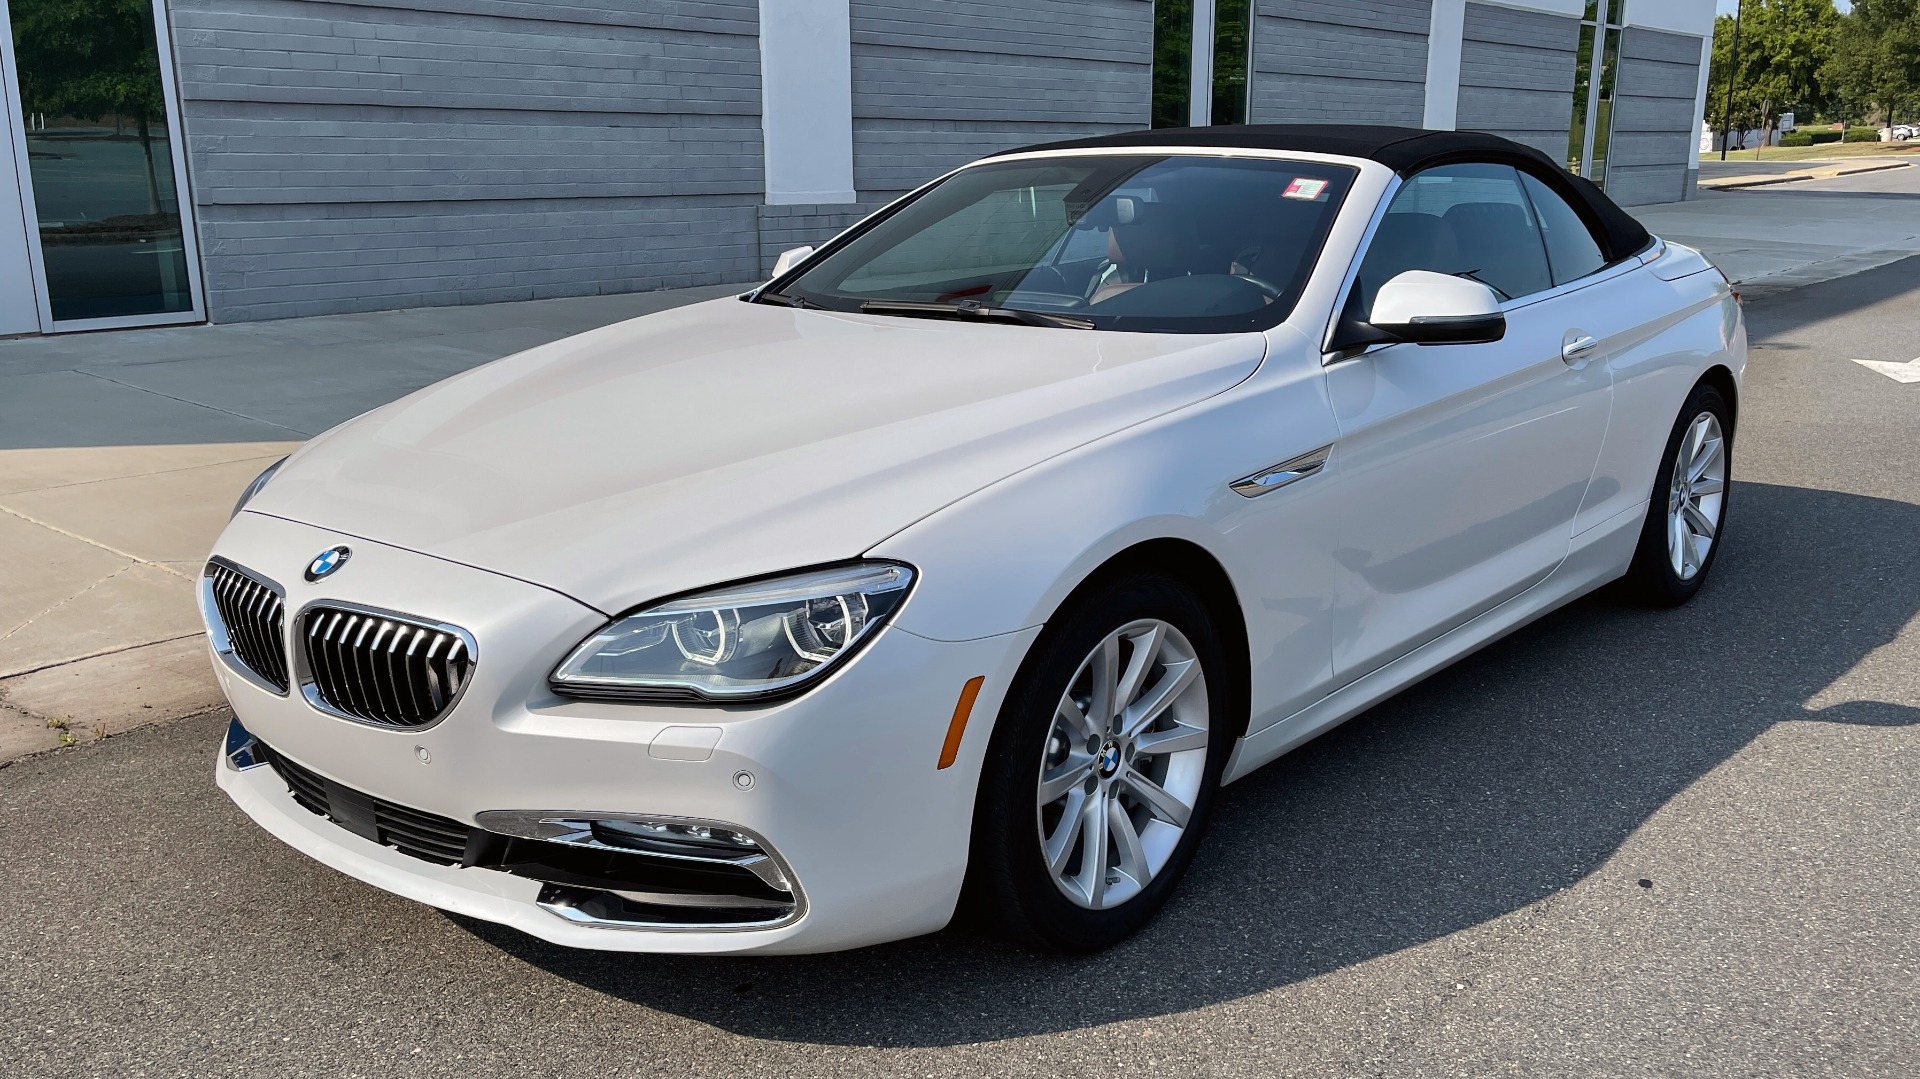 Used 2016 BMW 6 SERIES 640I CONVERTIBLE / 3.0L I6 / 8-SPD AUTO / RWD / NAV / REARVIEW for sale Sold at Formula Imports in Charlotte NC 28227 10